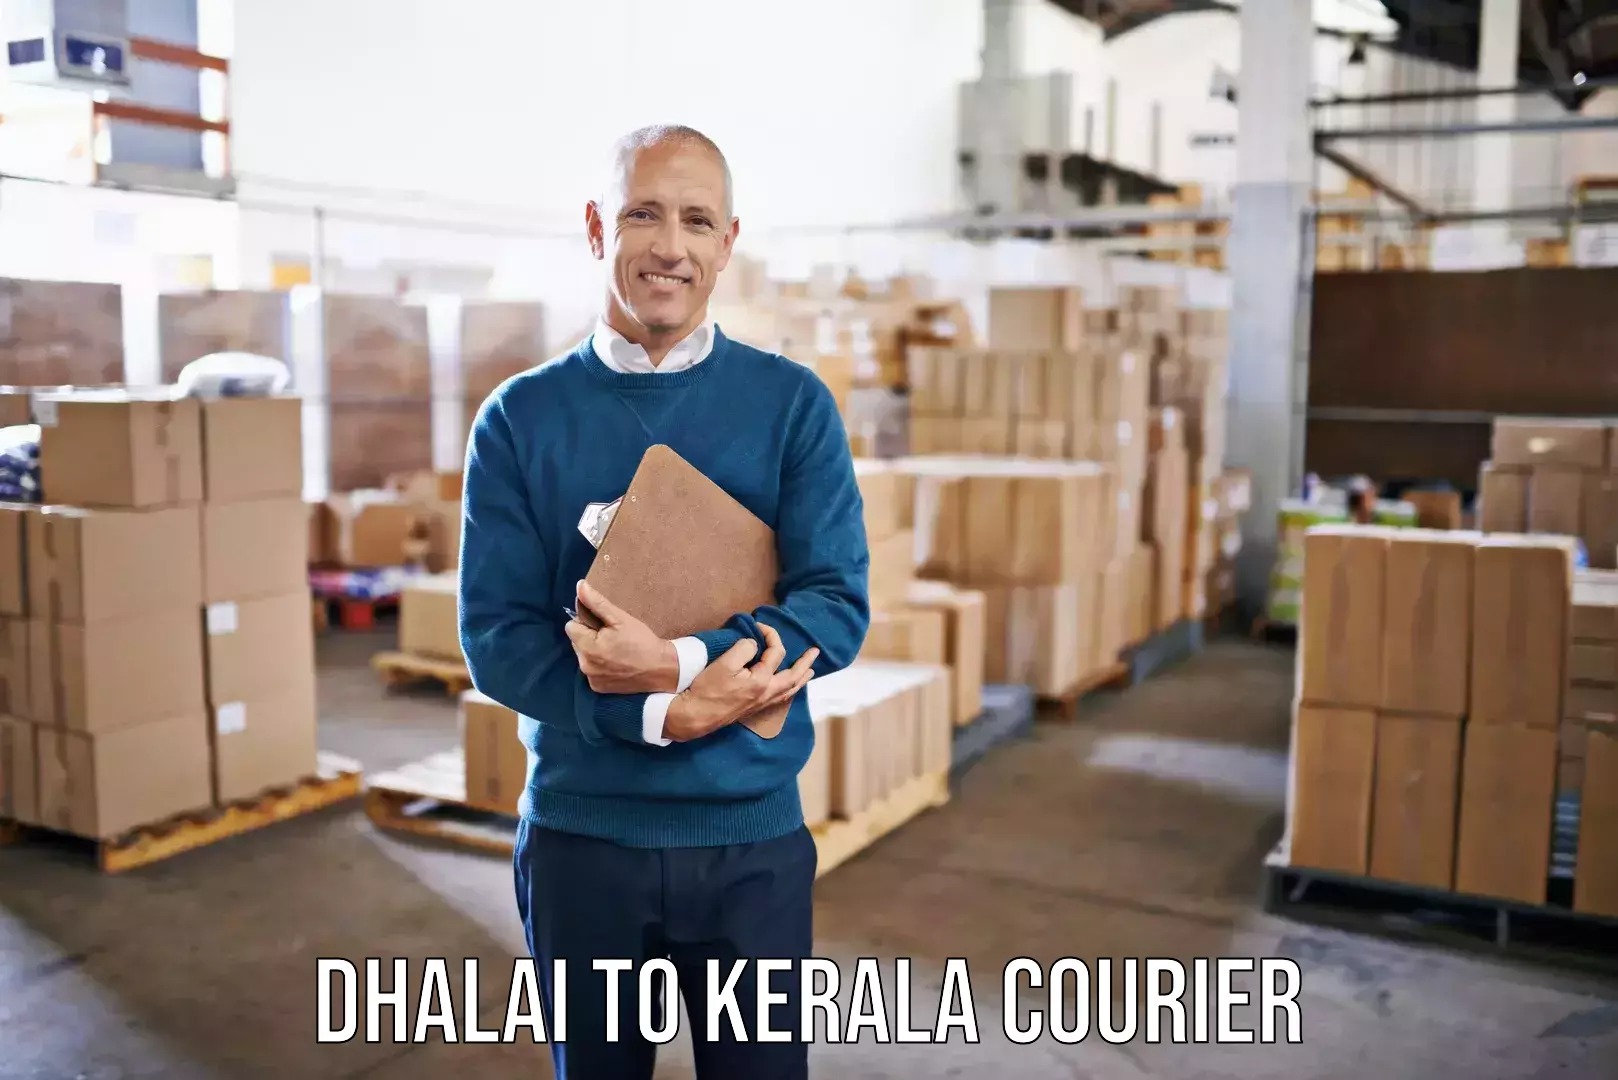 Furniture transport specialists Dhalai to Chungatra